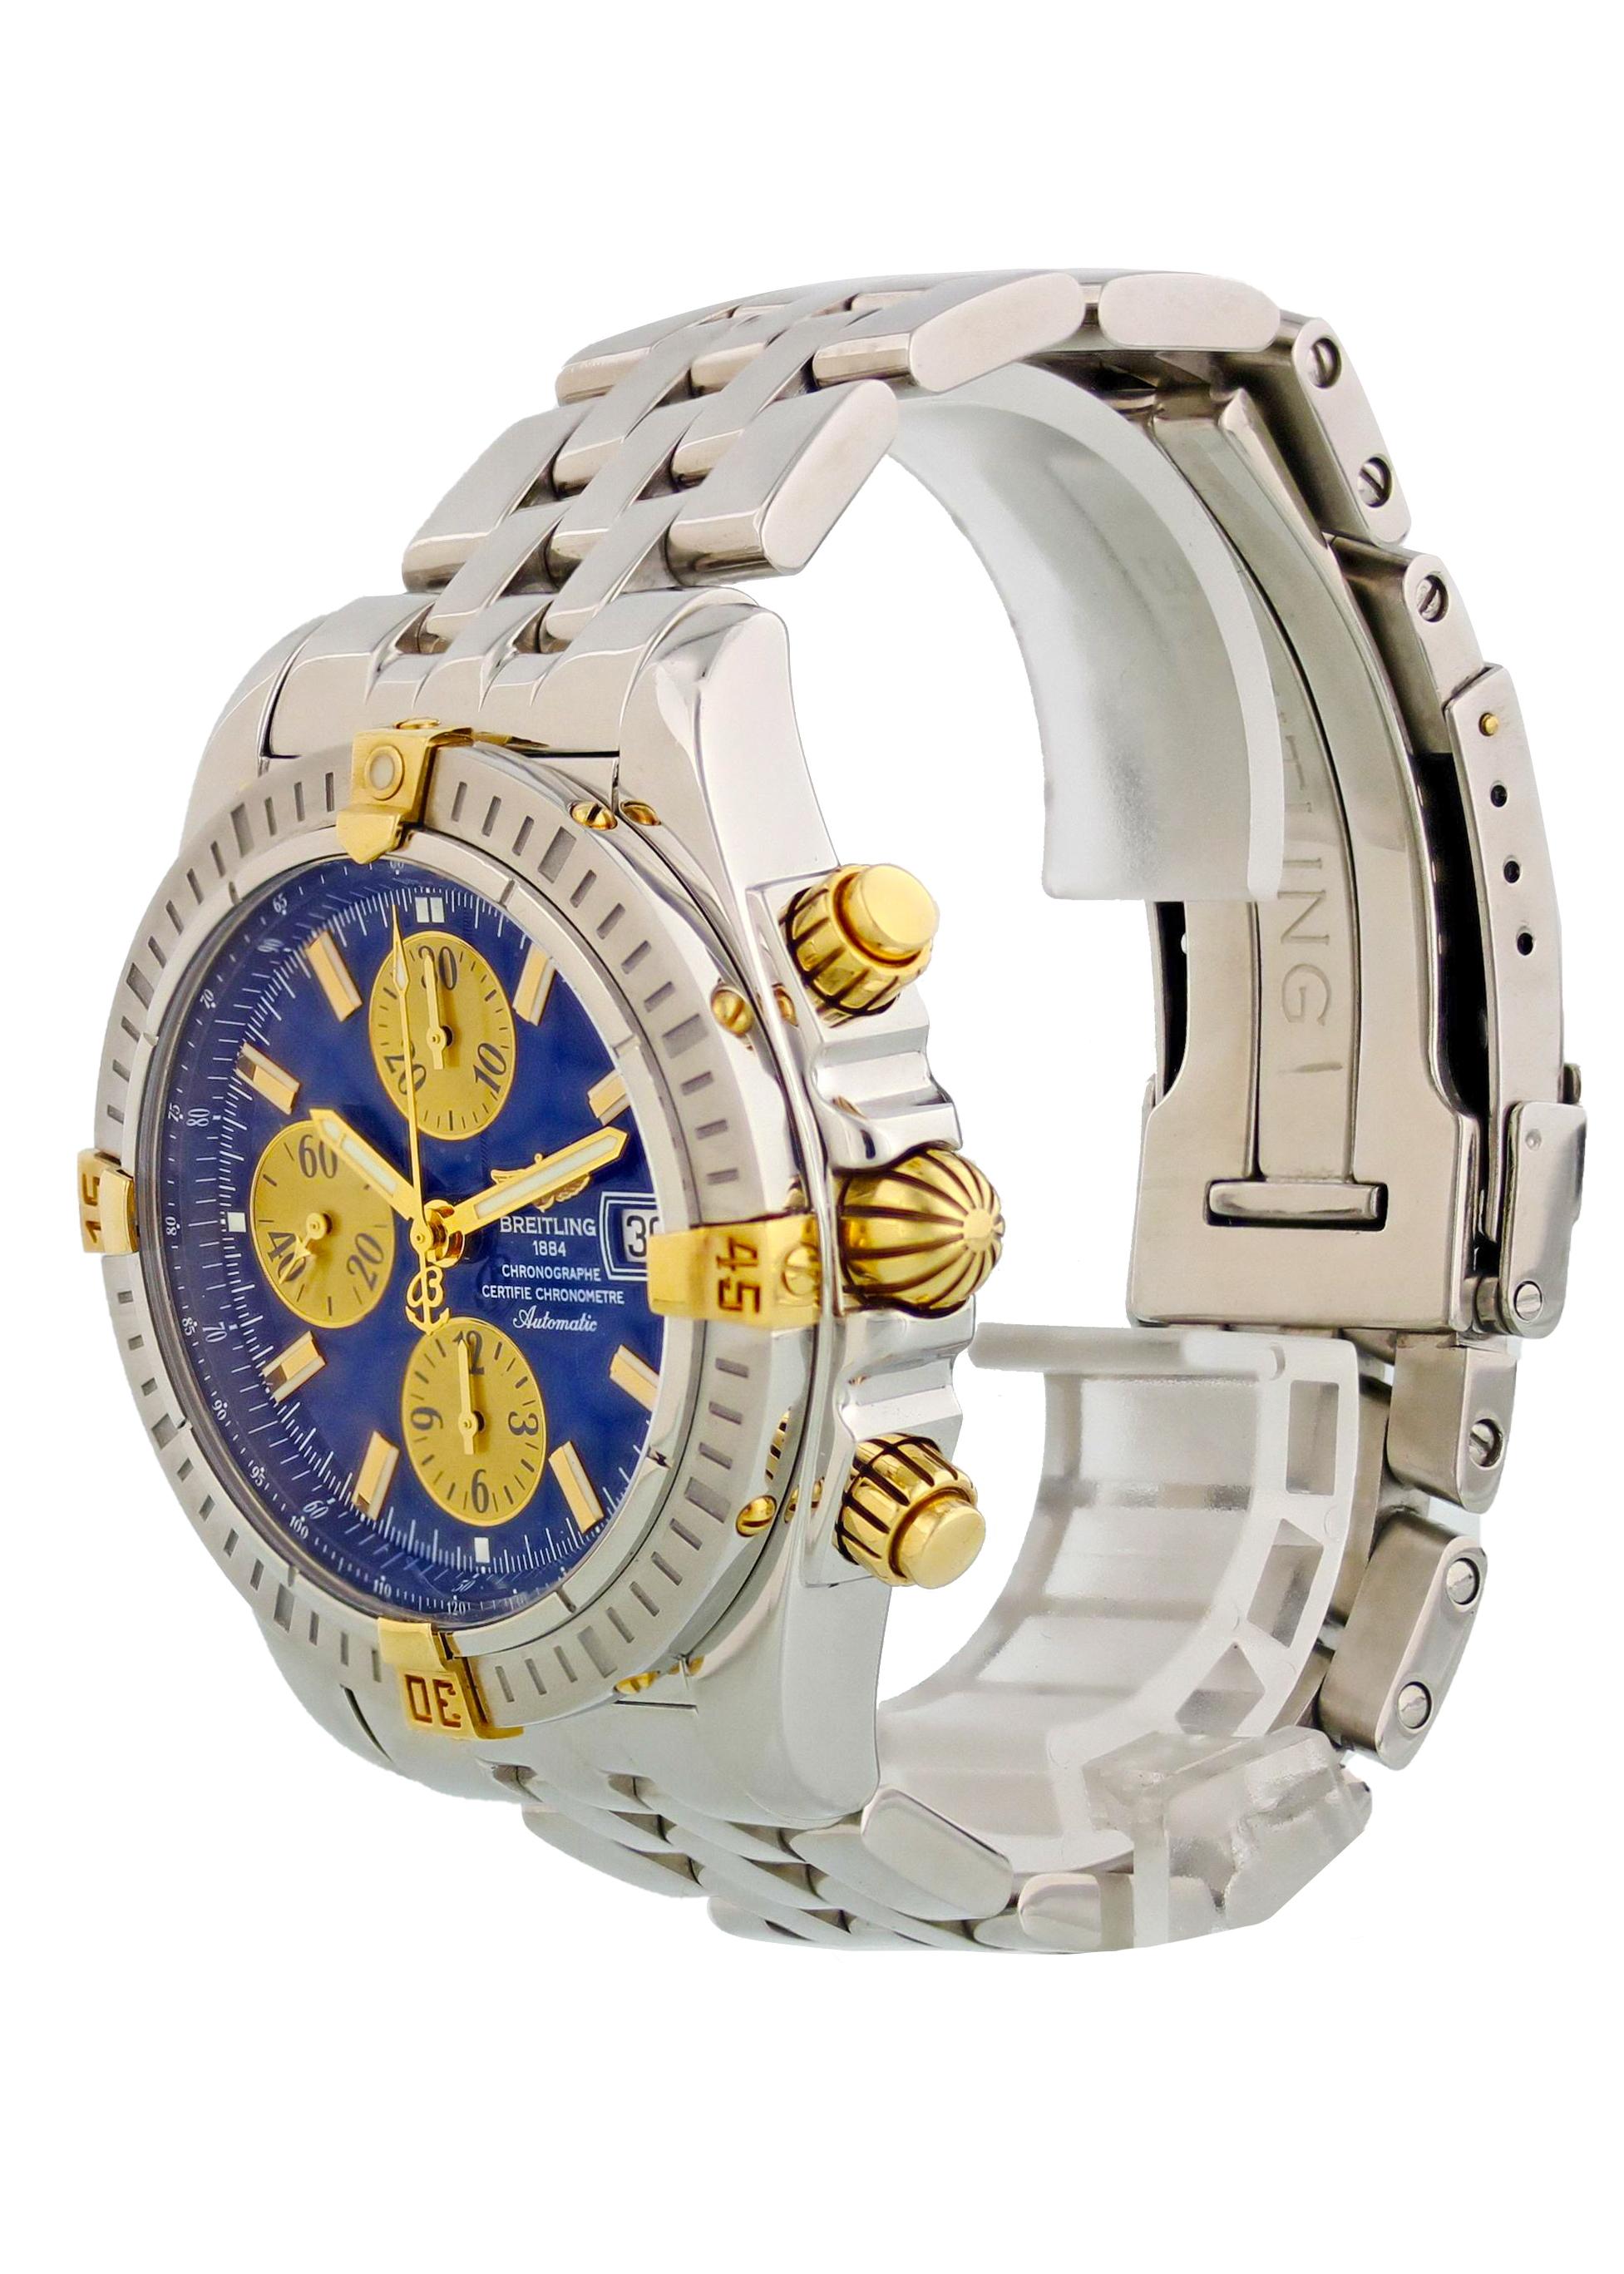 Breitling Chronomat Evolution B13356 Mens Watch. 44mm stainless steel case with unidirectional bezel. Blue dial with luminous hands and indexes. Date display. Three chronograph sub-dials displaying small seconds, minutes, and hours. Stainless steel